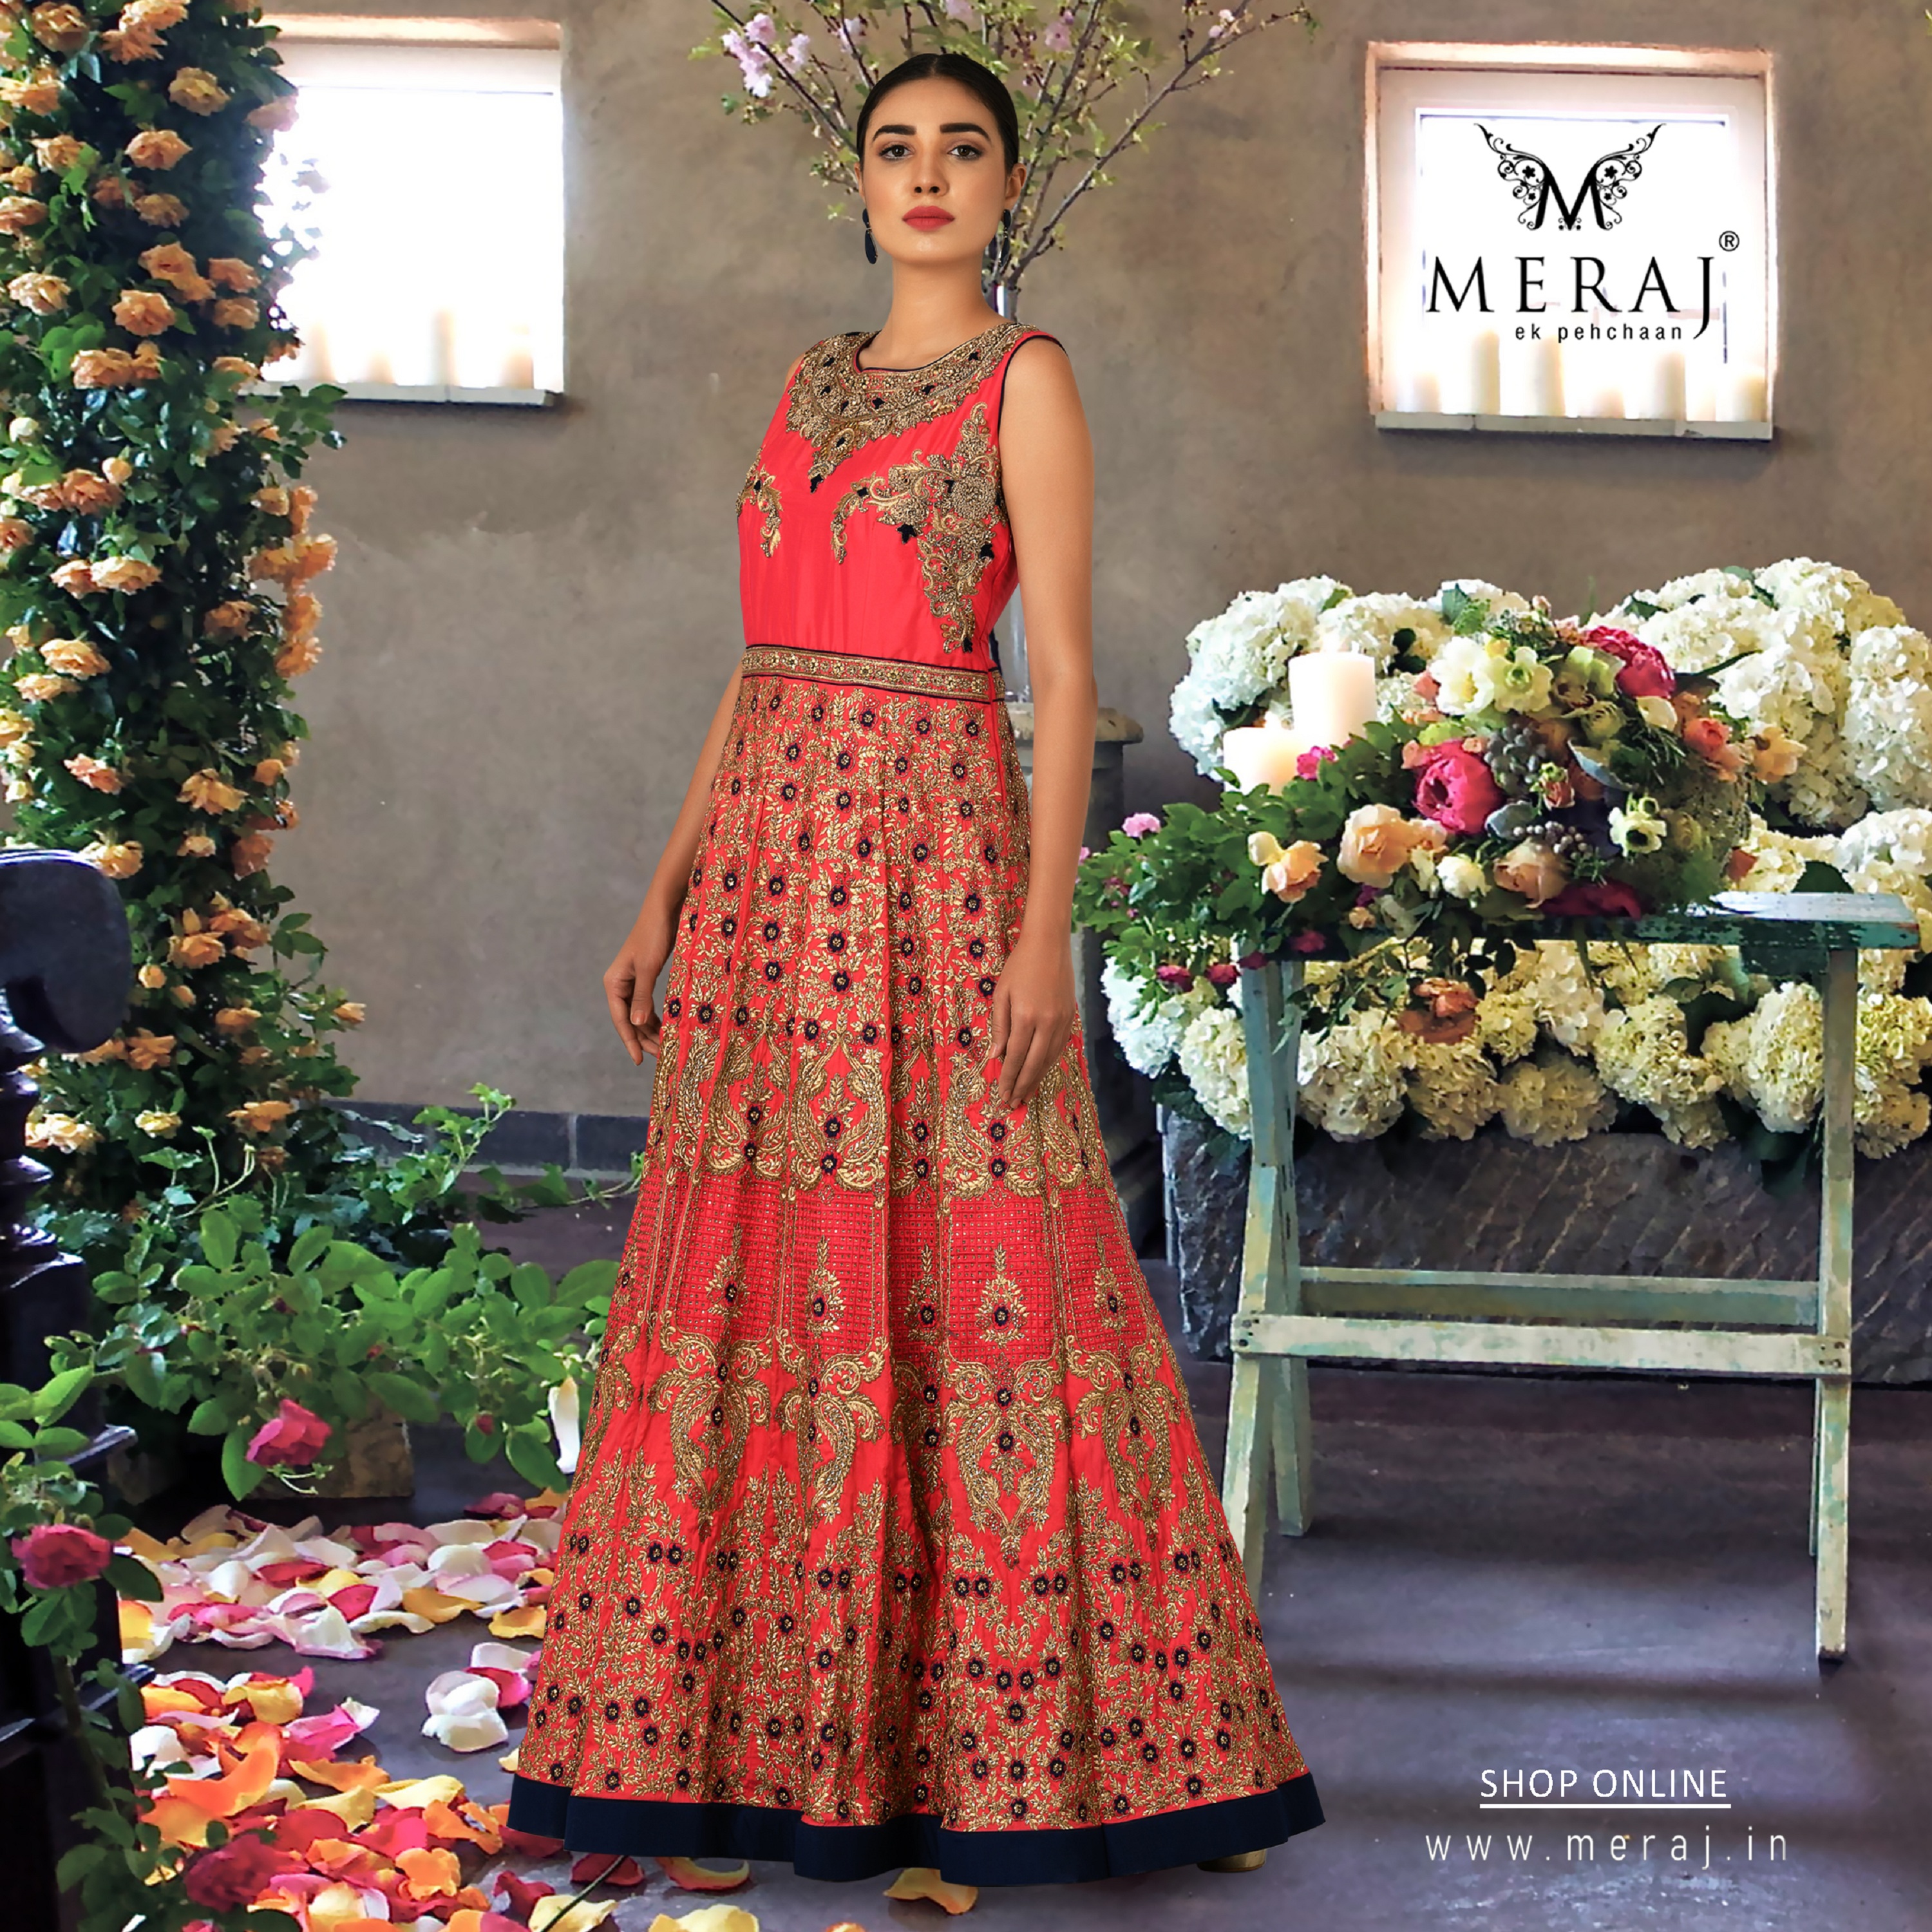 Get Instagram worthy pictures in these gorgeous outfits from our new Ramadan collection